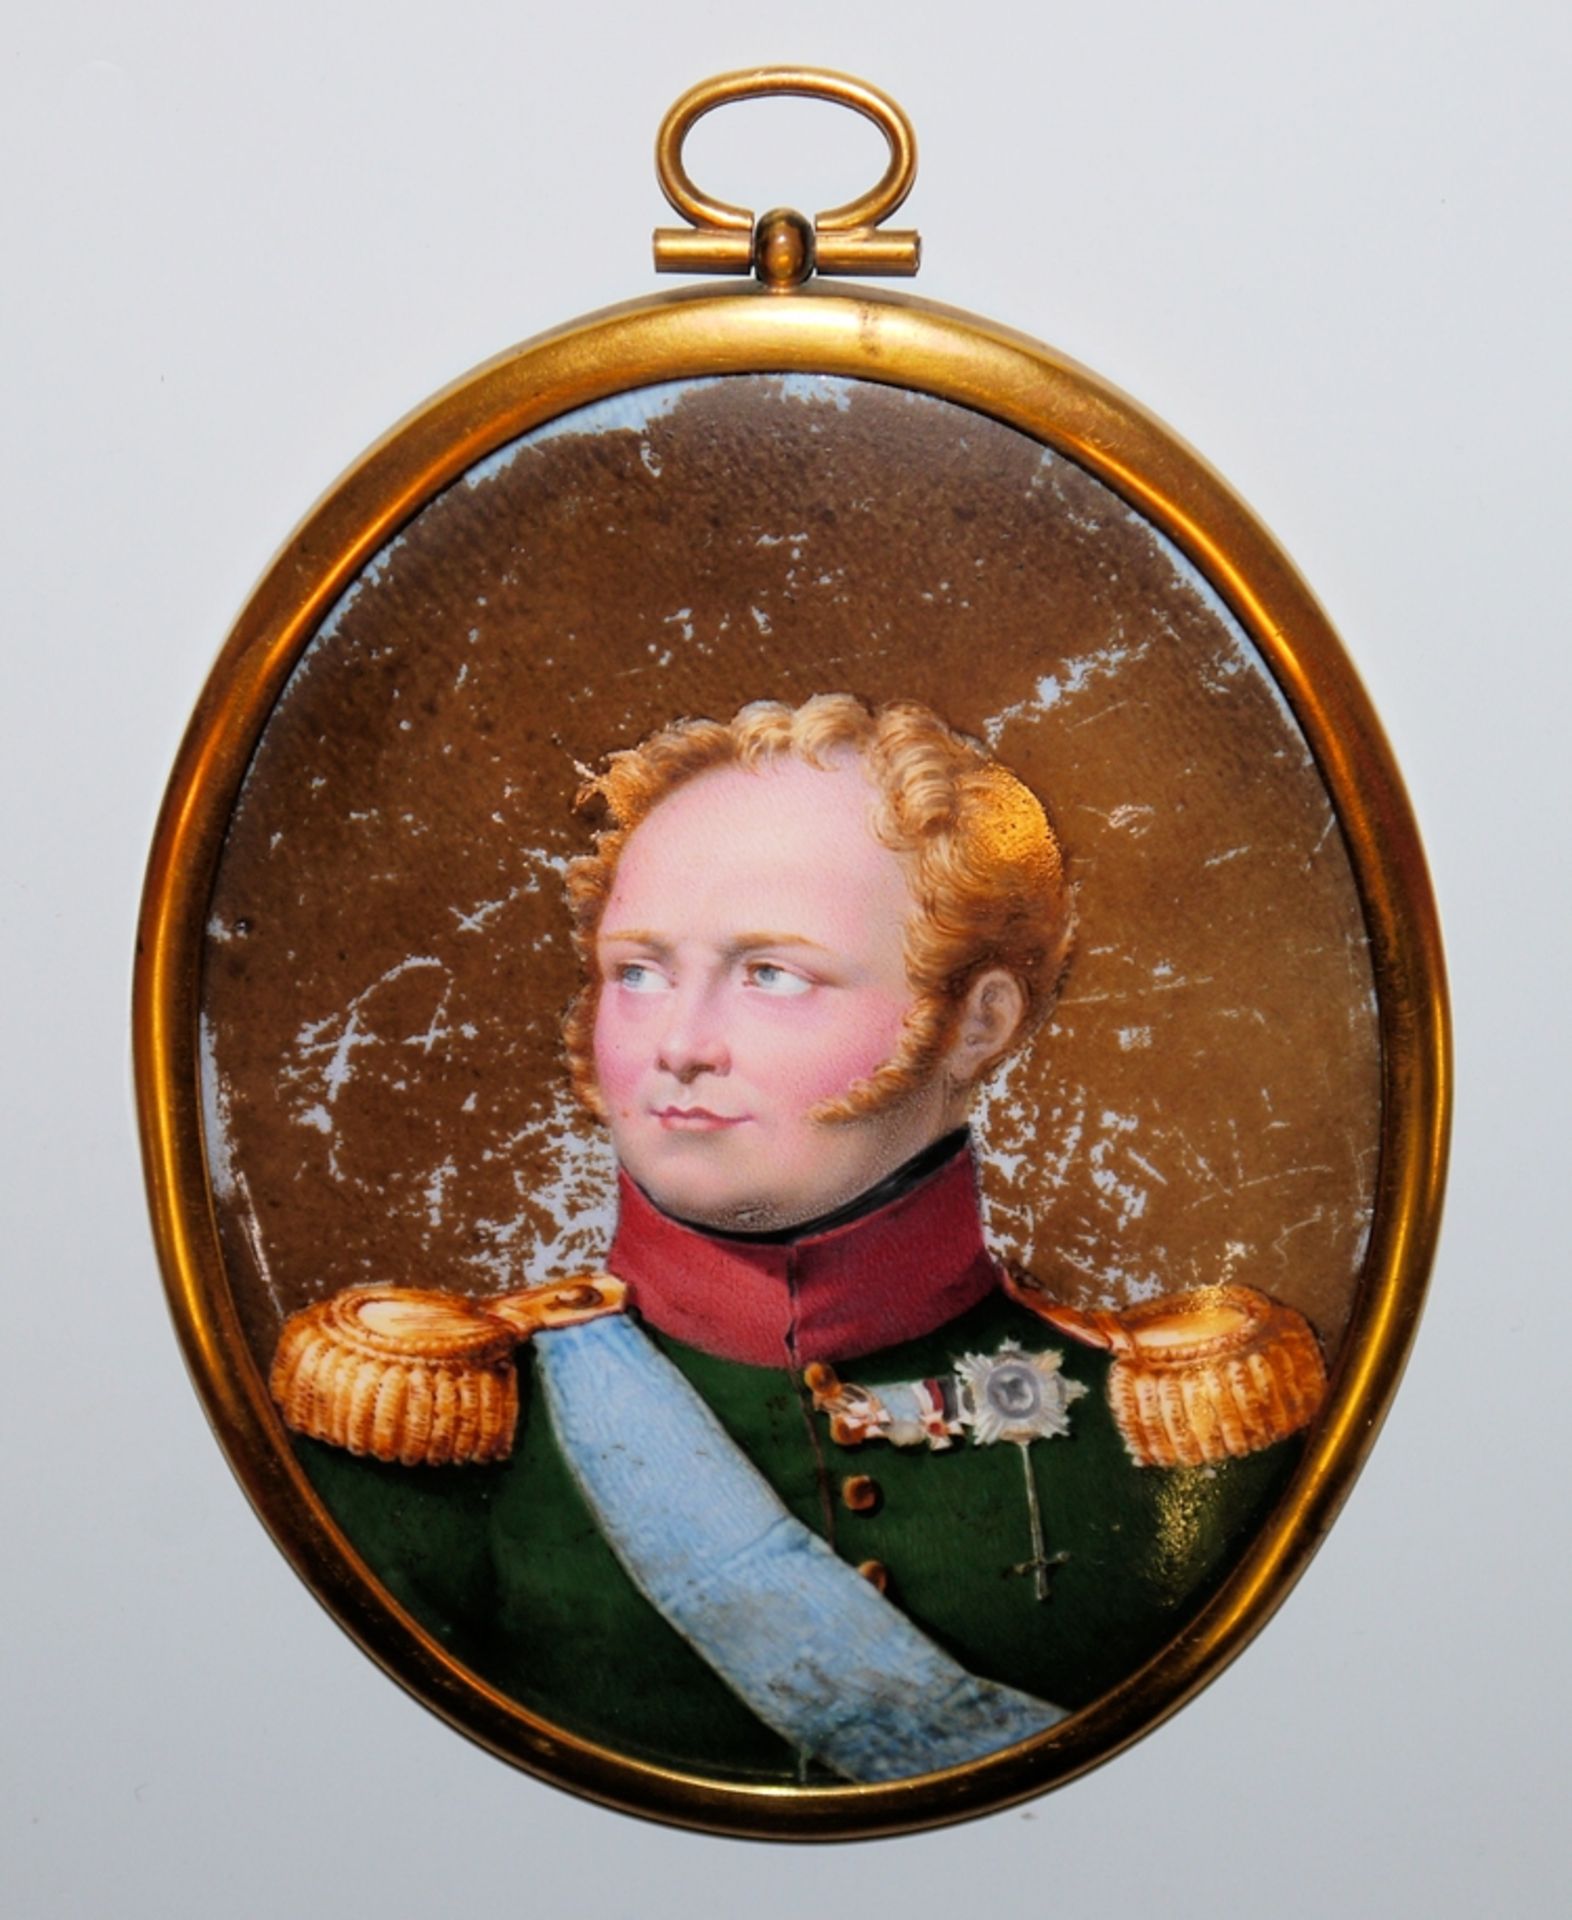 Five miniatures, Russia, 19th century - Image 2 of 5